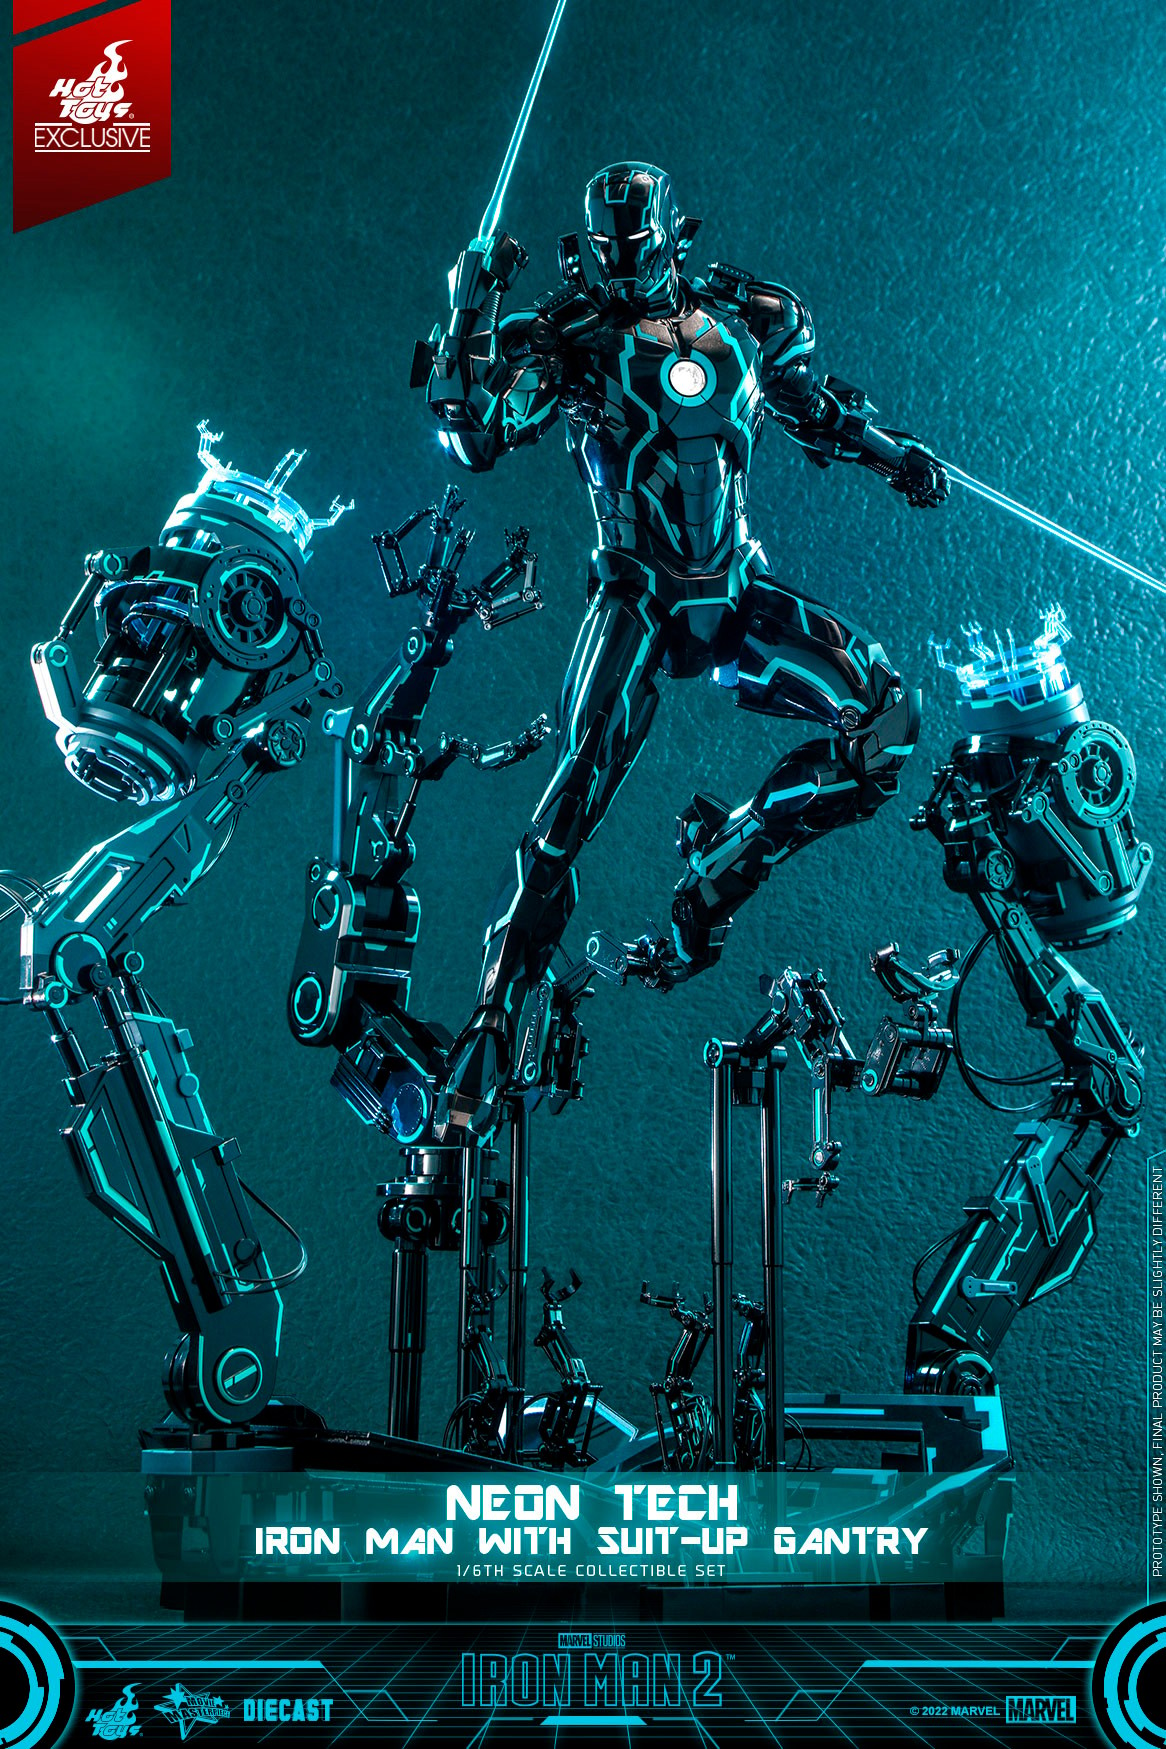 Neon Tech Iron Man with Suit-Up Gantry